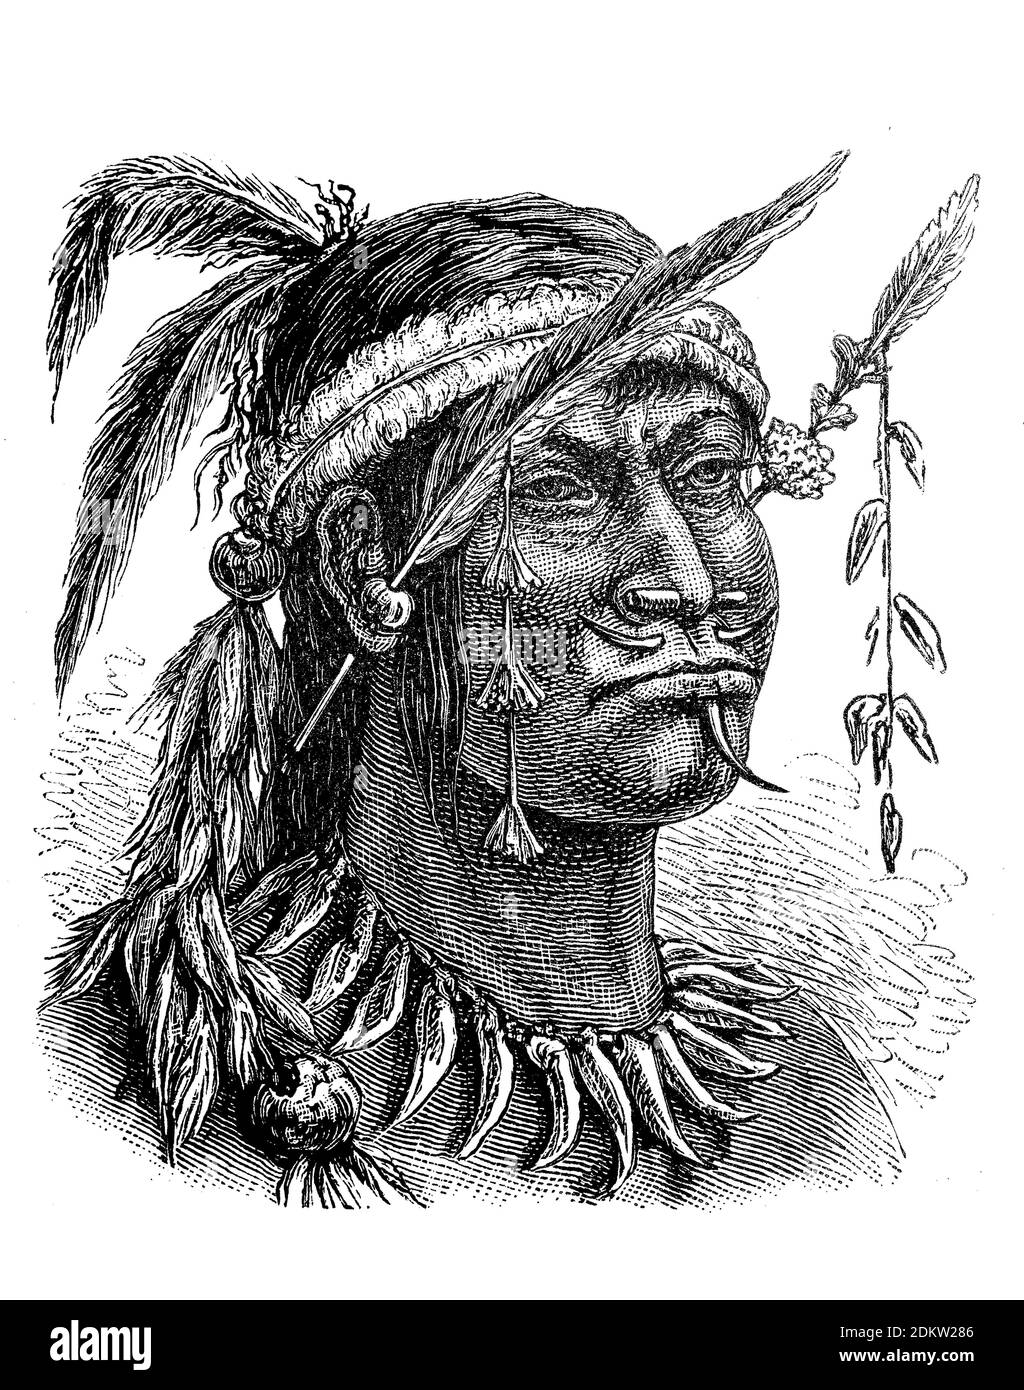 Indian, here a man from the Foregnaje tribe, America, illustration from 1880  /  Indianer, hier ein Mann aus dem Stamm der Foregnaje, Amerika, Illustration aus 1880, Historisch, historical, digital improved reproduction of an original from the 19th century / digitale Reproduktion einer Originalvorlage aus dem 19. Jahrhundert Stock Photo